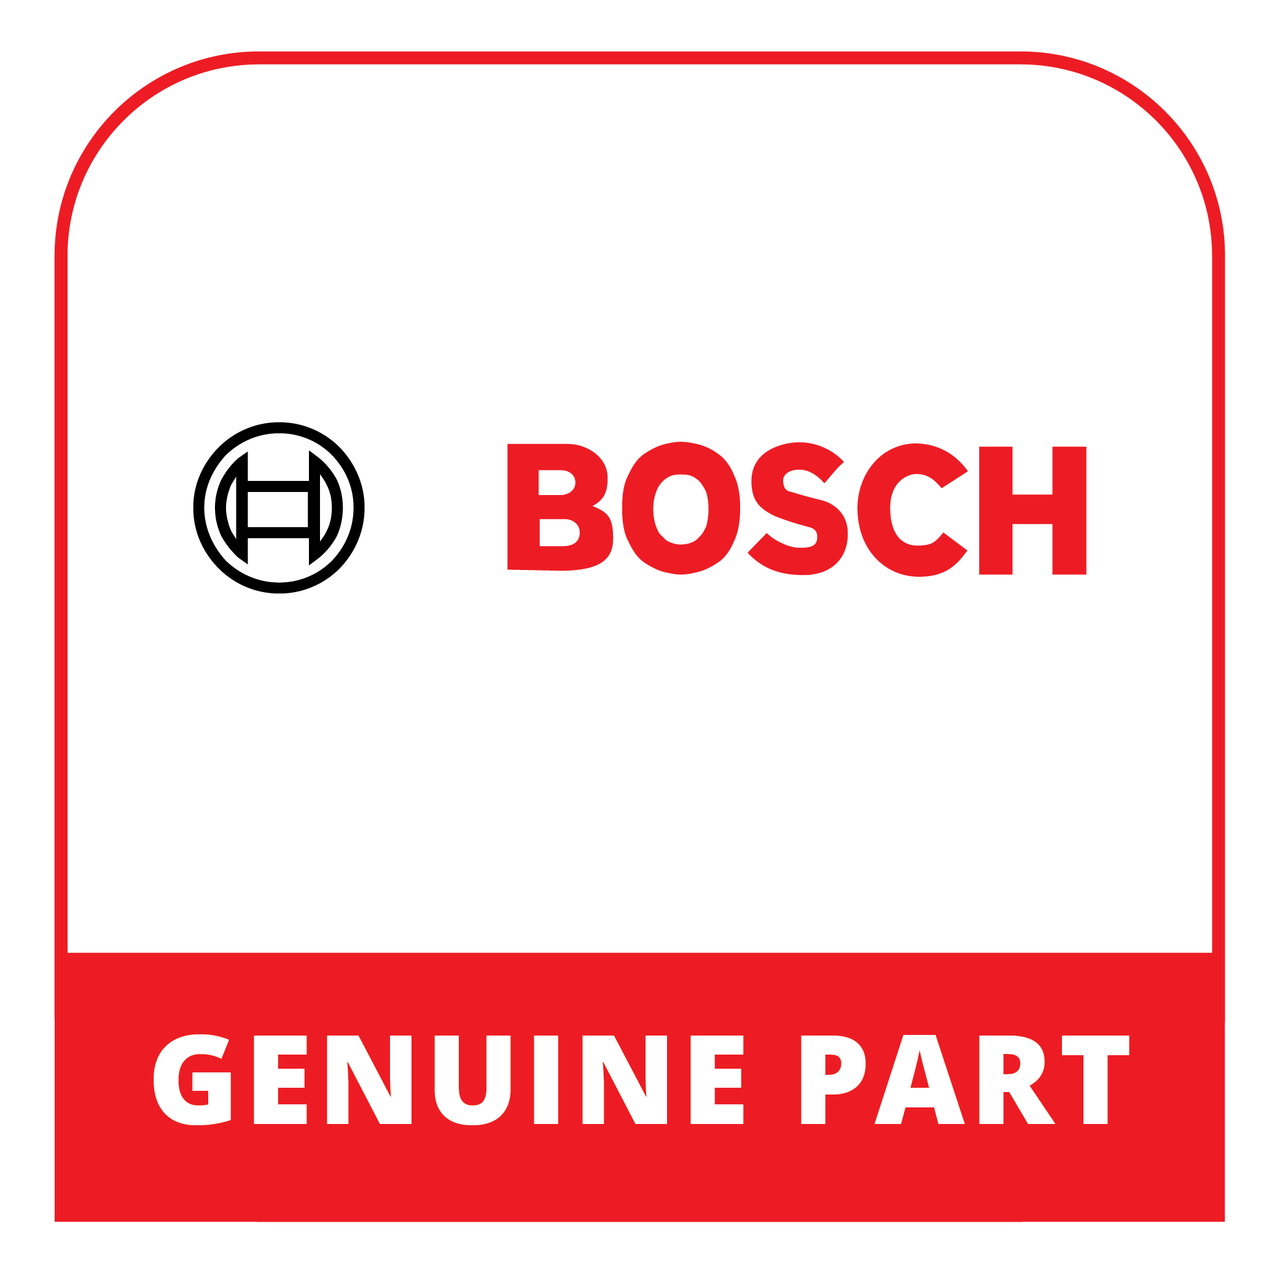 Bosch (Thermador) 18080490 - Instruction Manual - Genuine Bosch (Thermador) Part